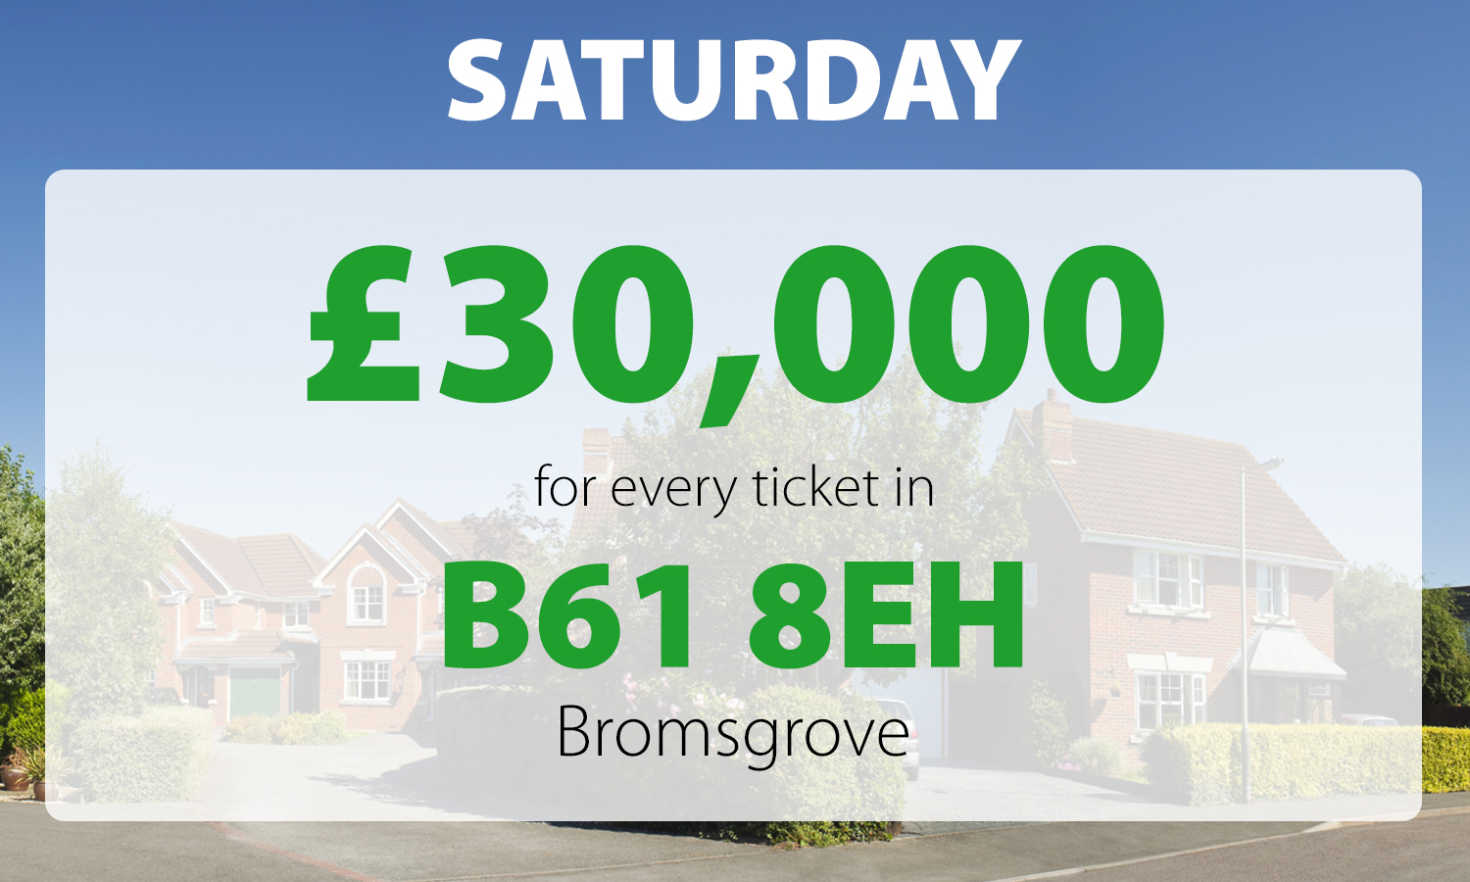 One lucky Bromsgrove player has scooped a fabulous £30,000